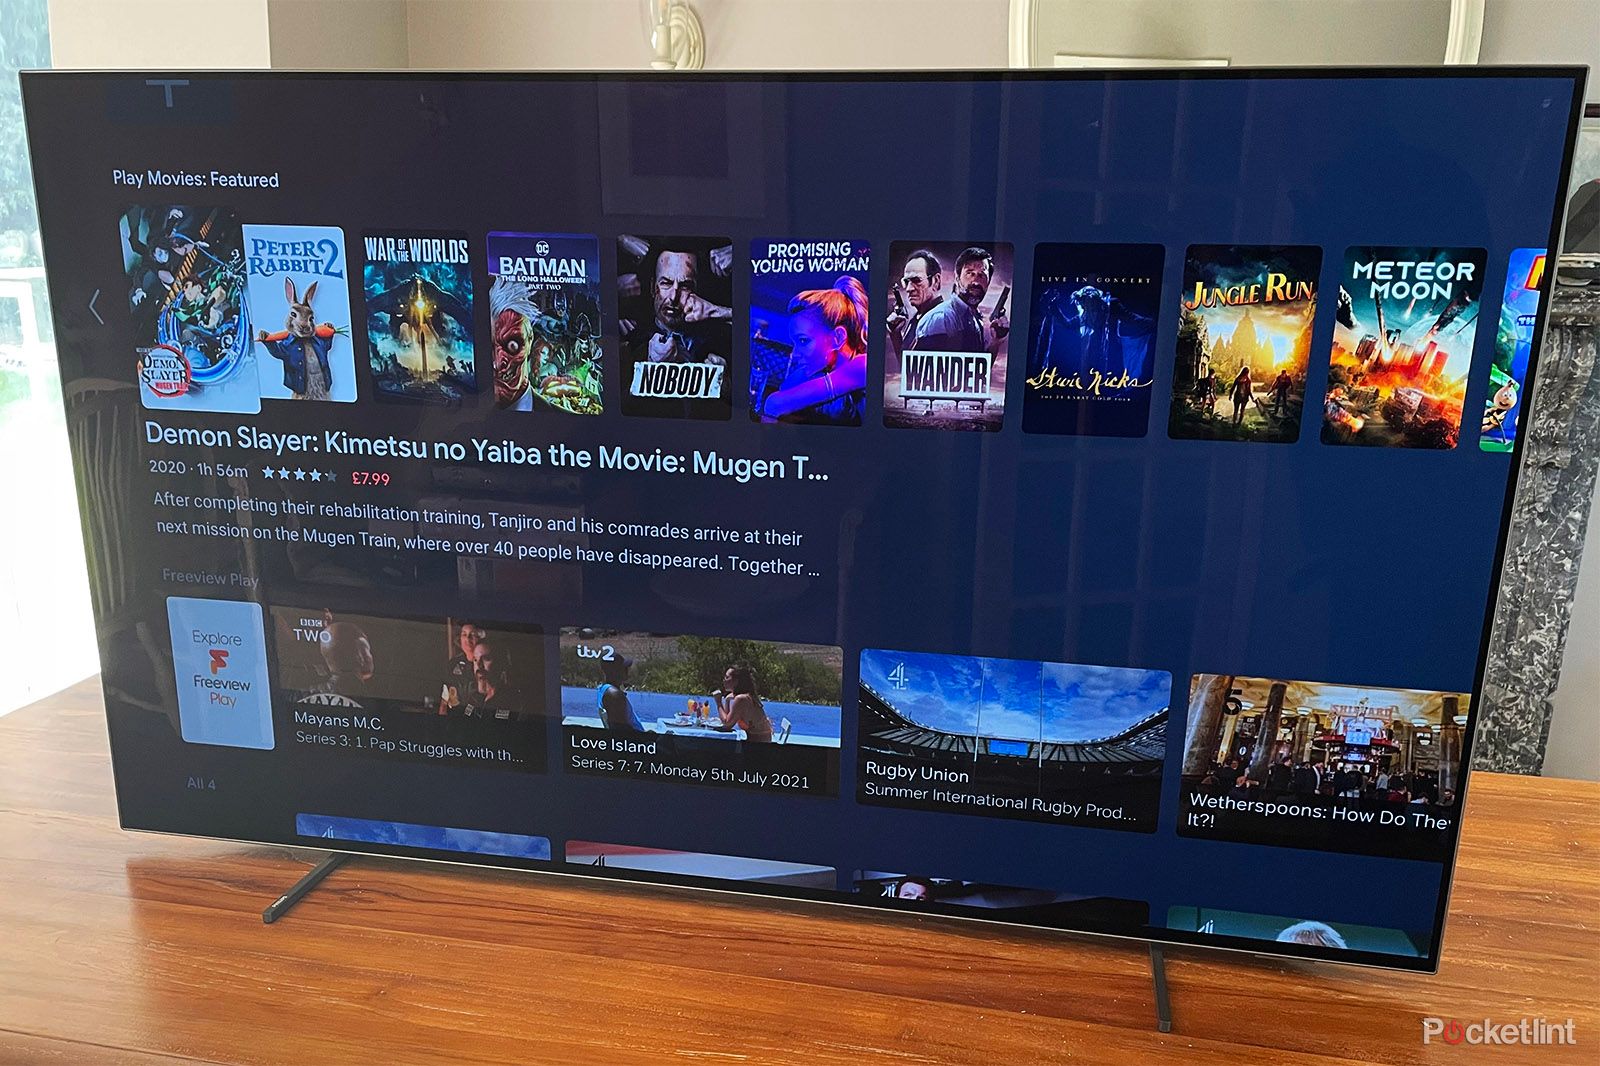 Pocket-lint Philips OLED 806 4K TV with Ambilight review photo 7